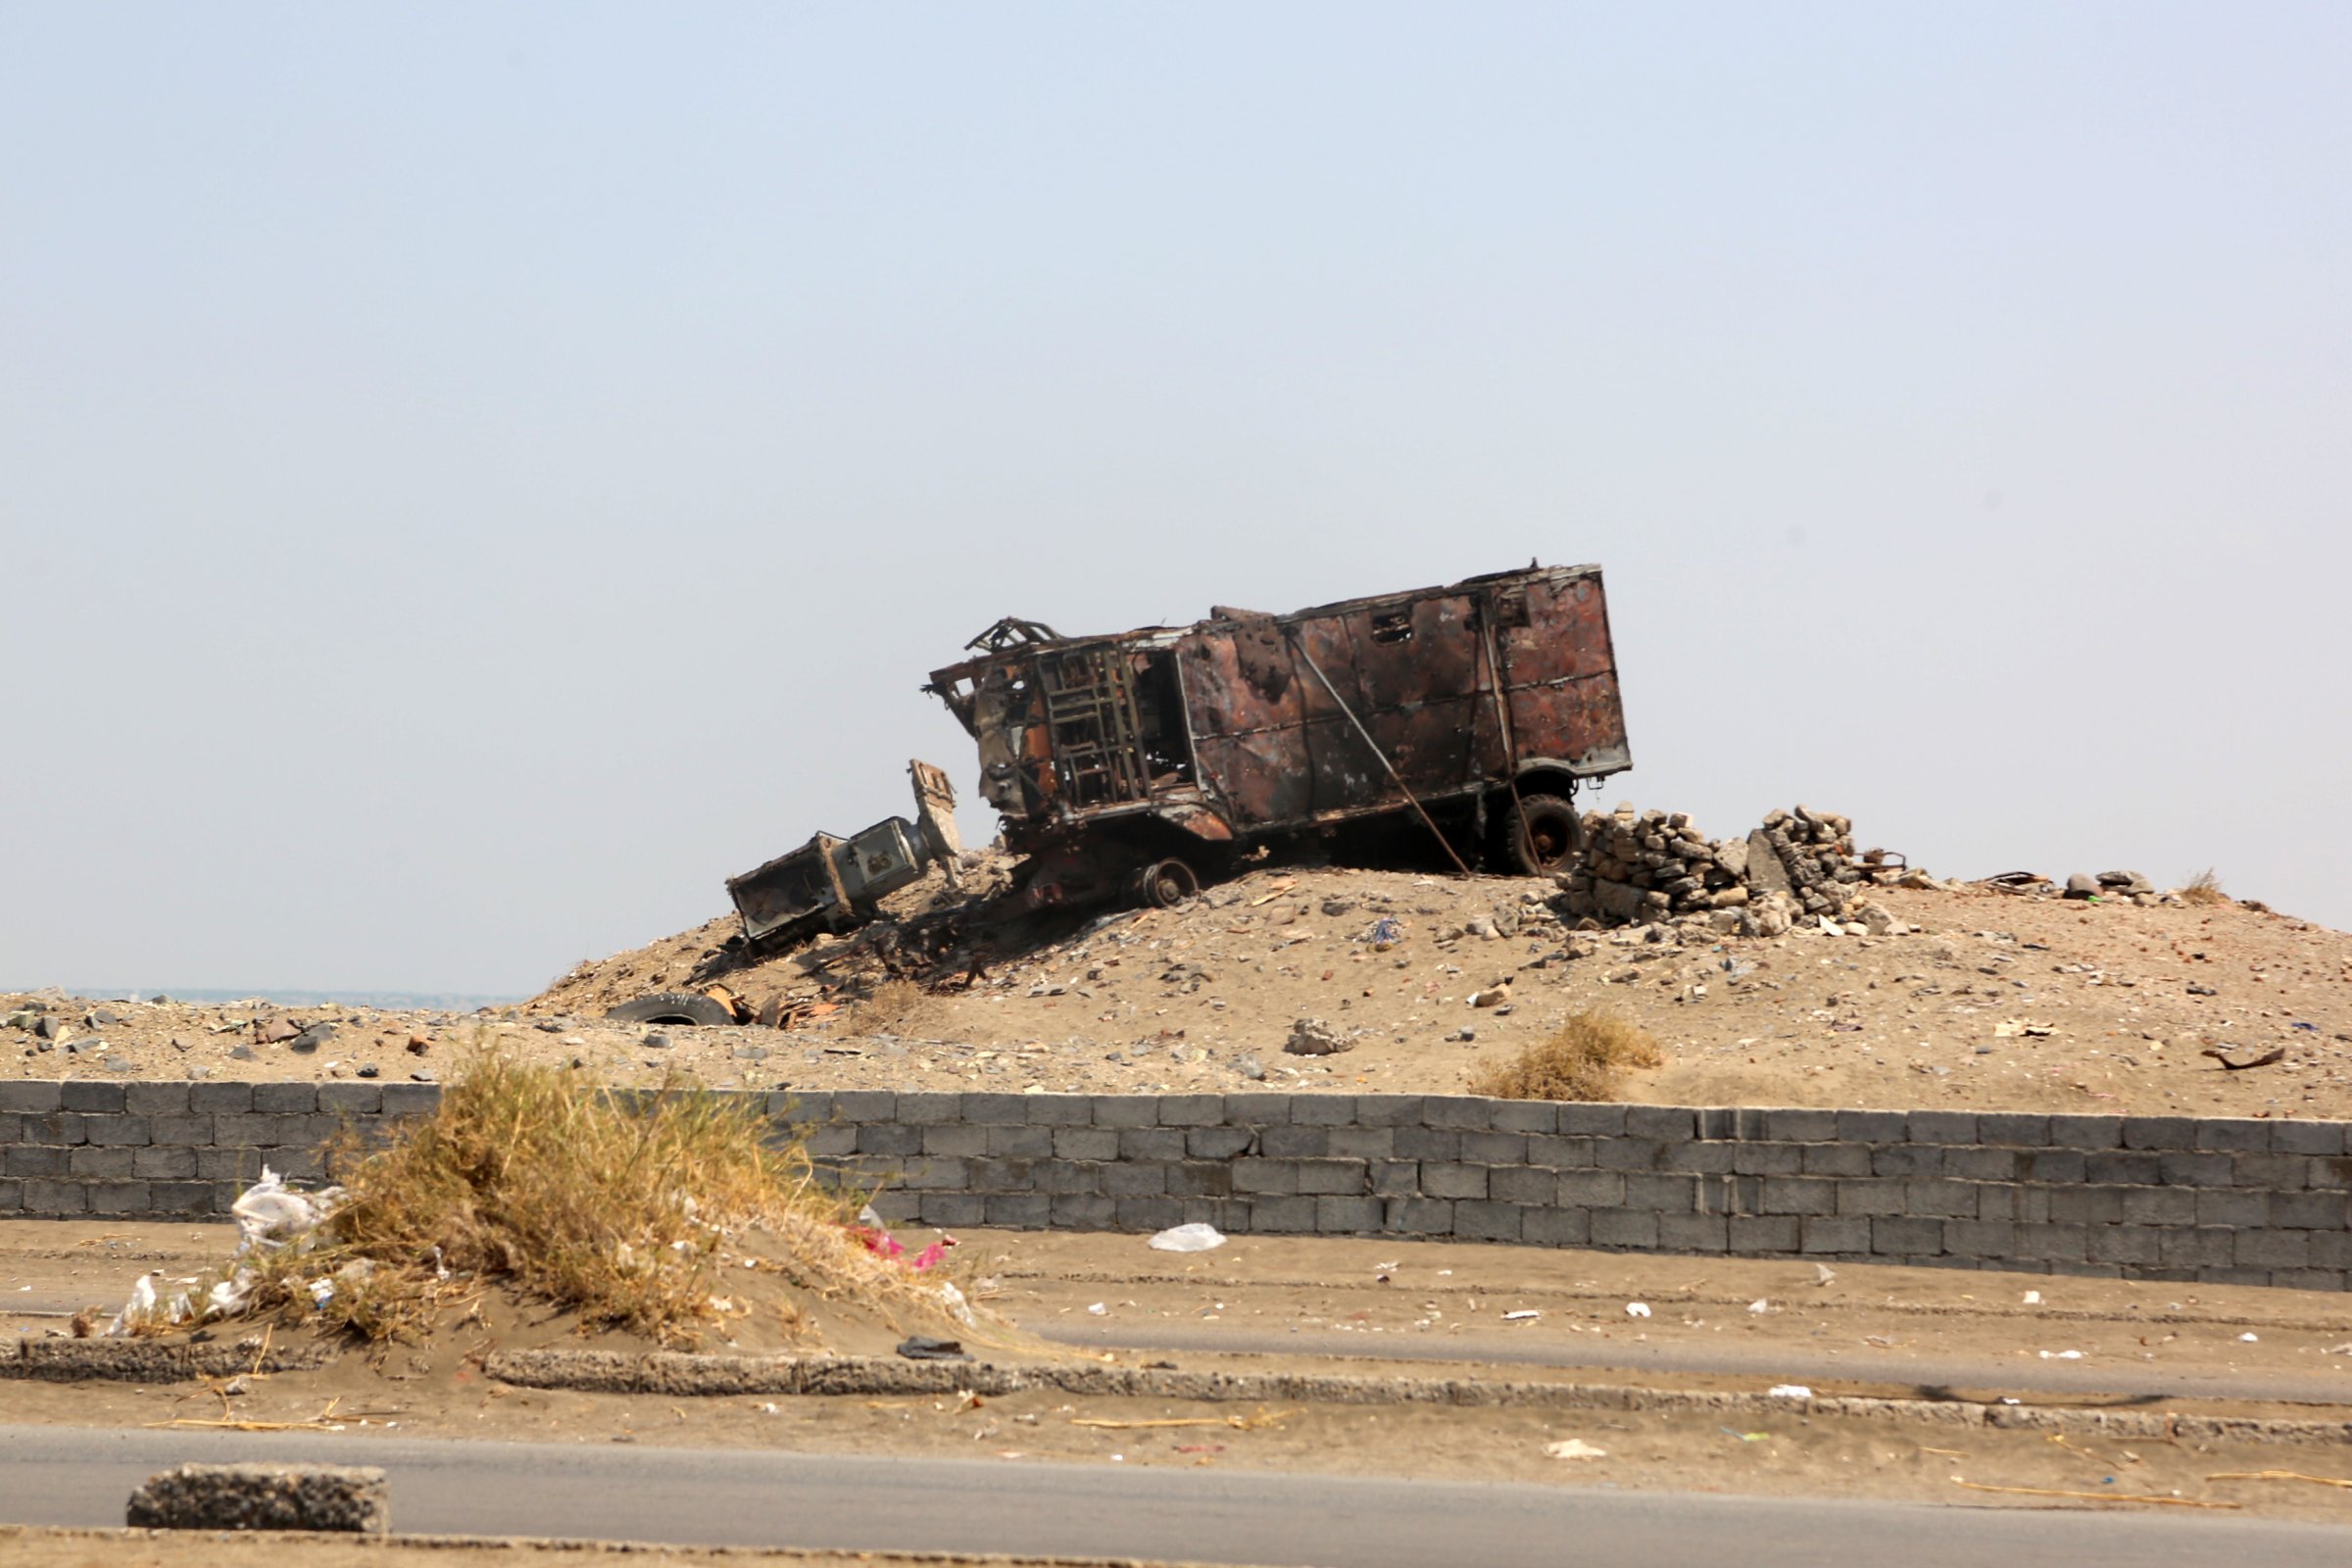 A destroyed vehicle is pictured in the Yemeni port city of Hodeidah on Oct. 13, 2016.